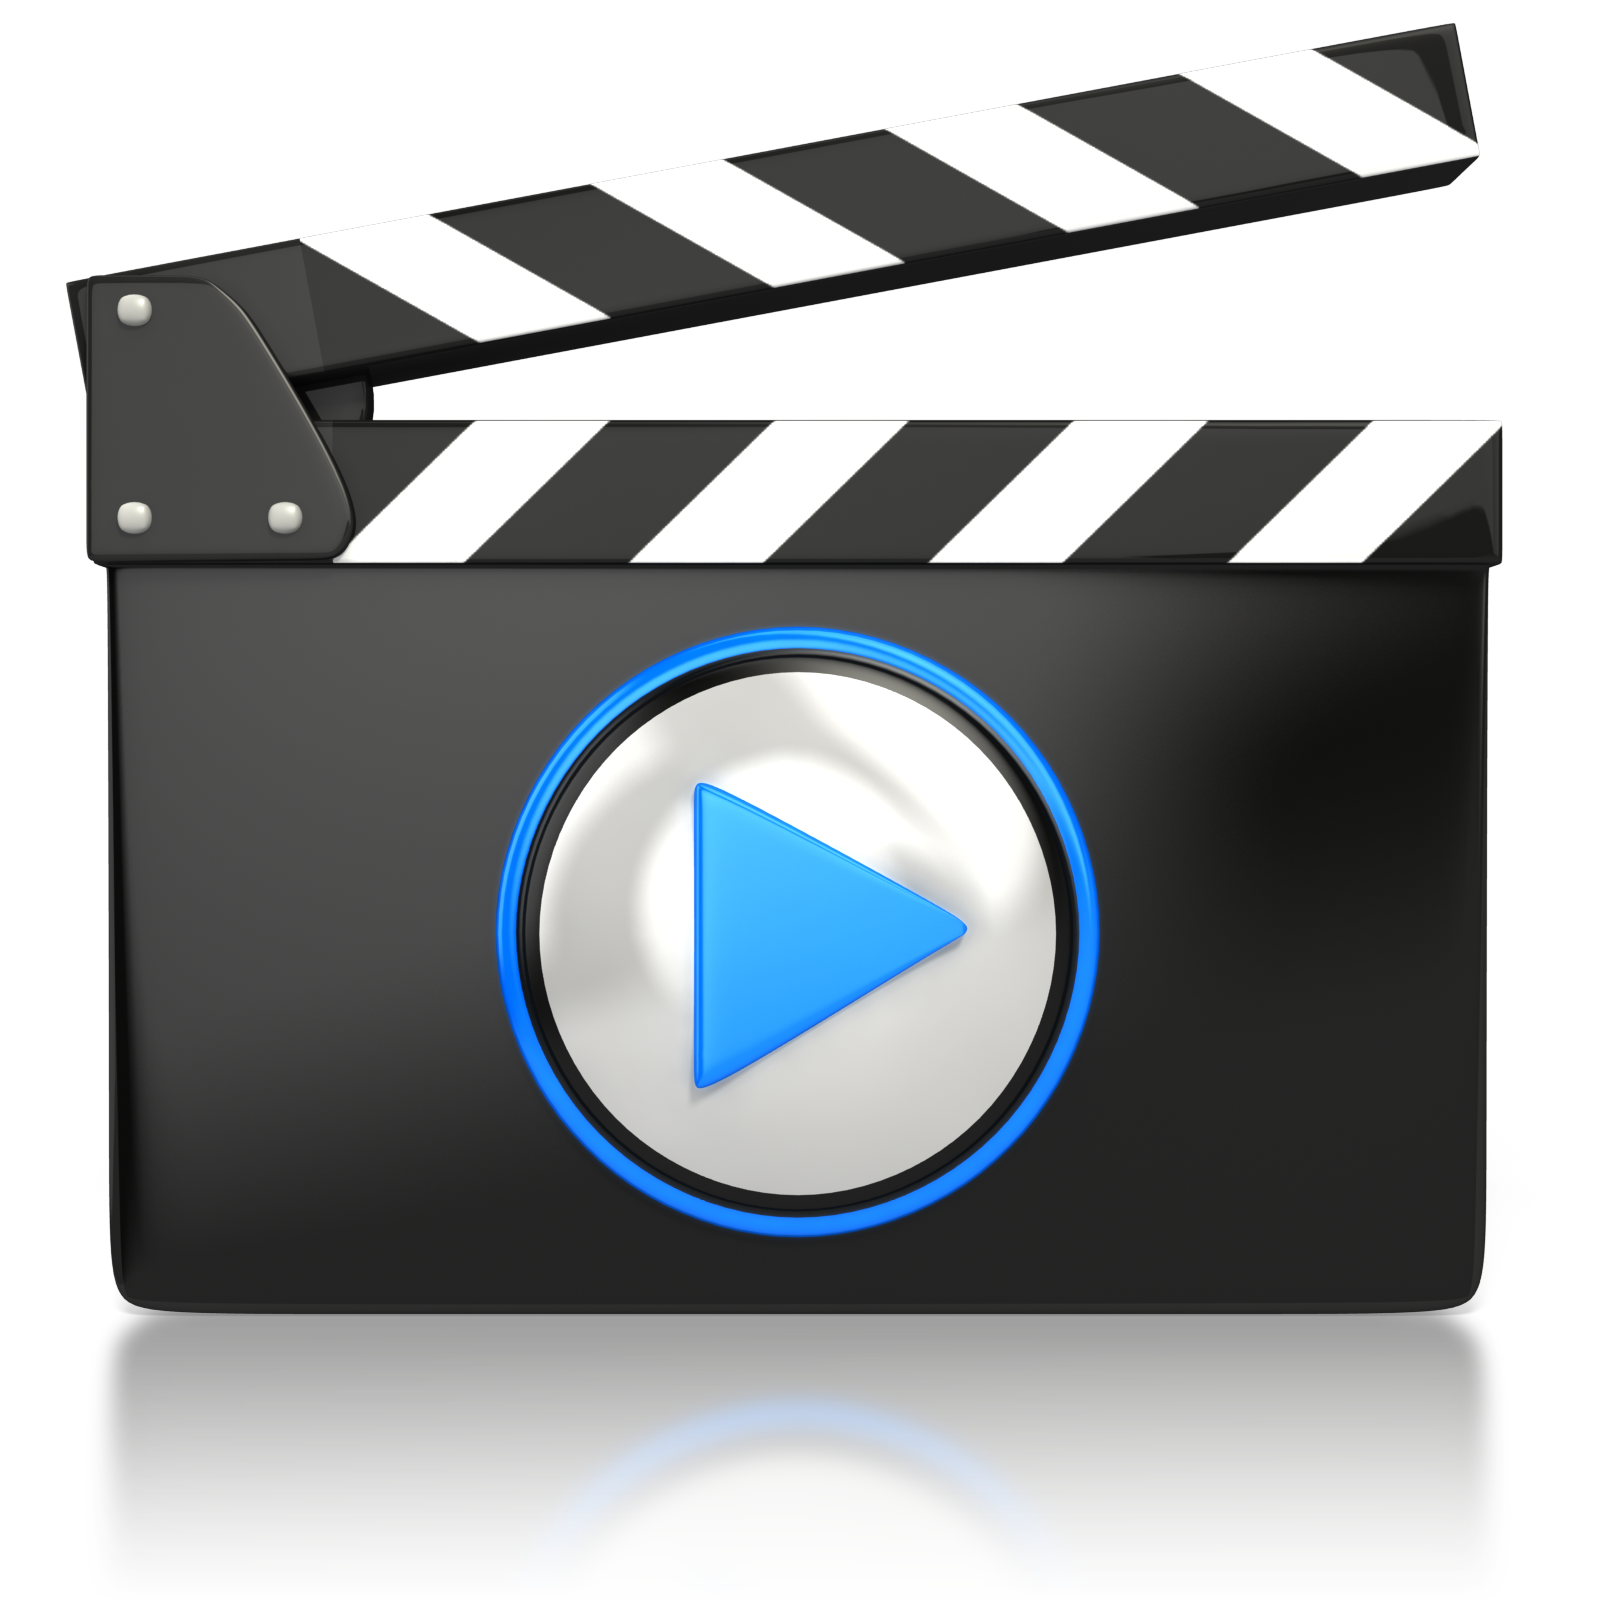 Video Meaning and Definition